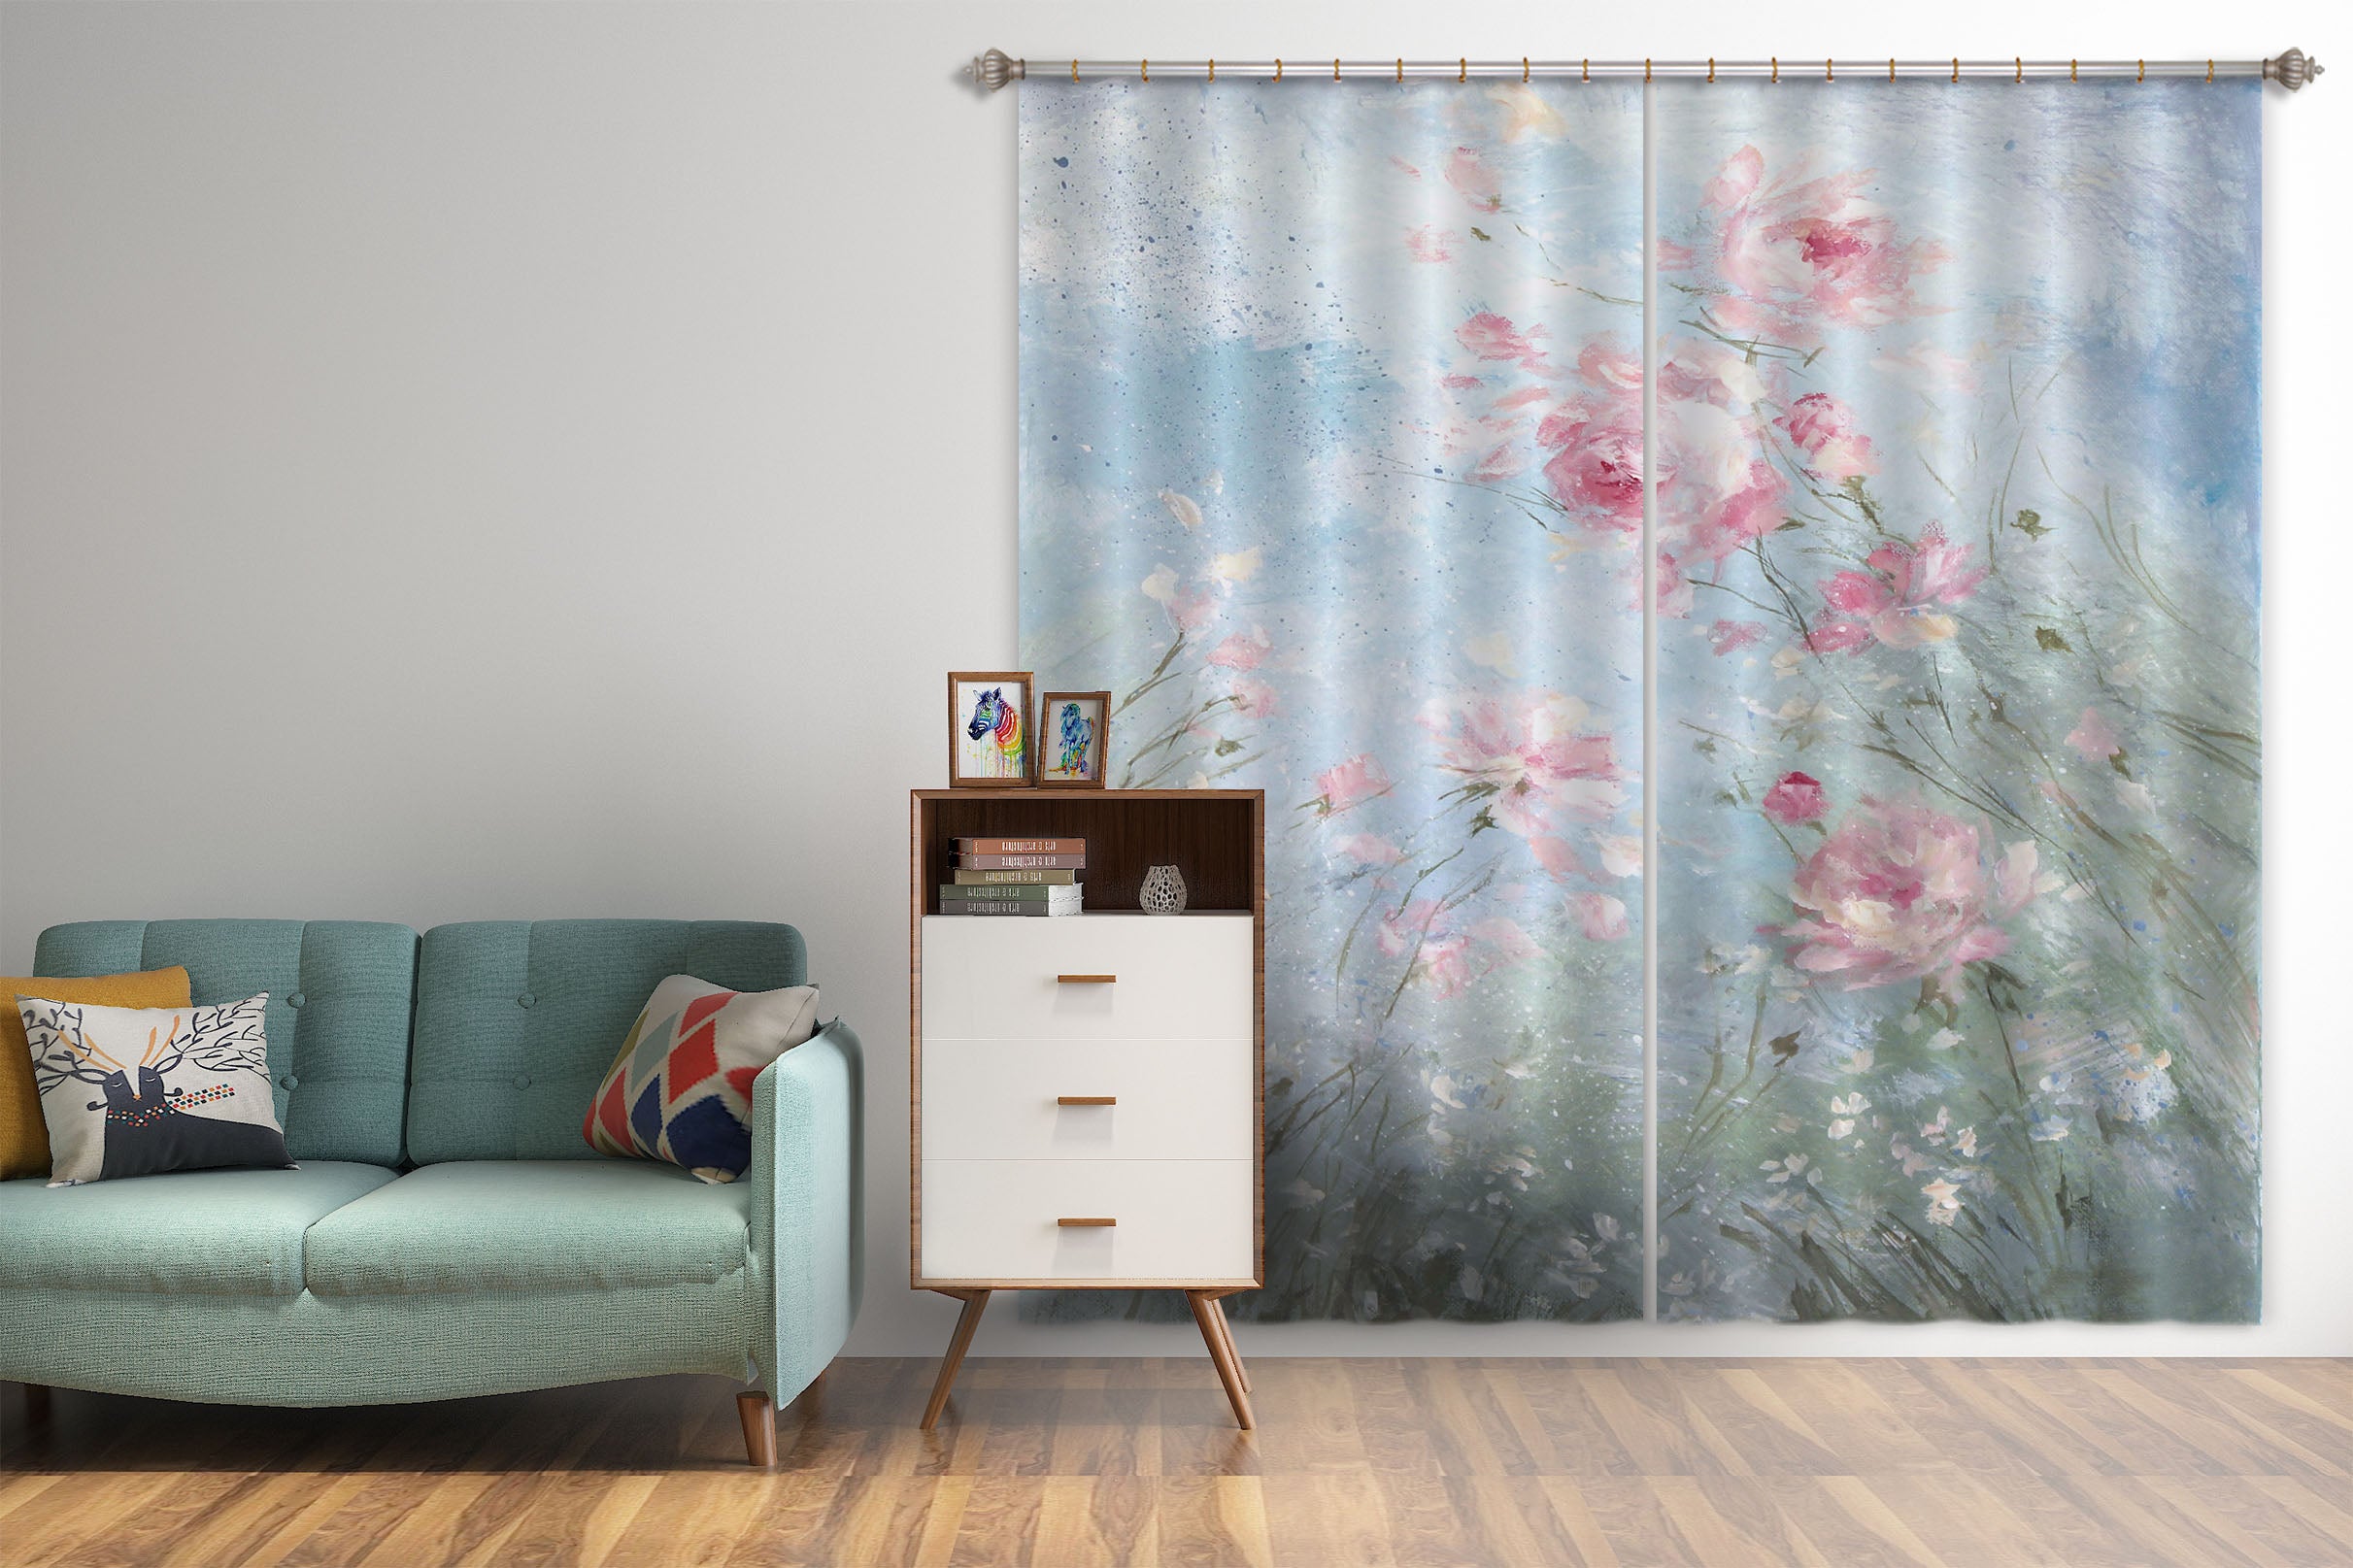 3D Pink Flowers 041 Debi Coules Curtain Curtains Drapes